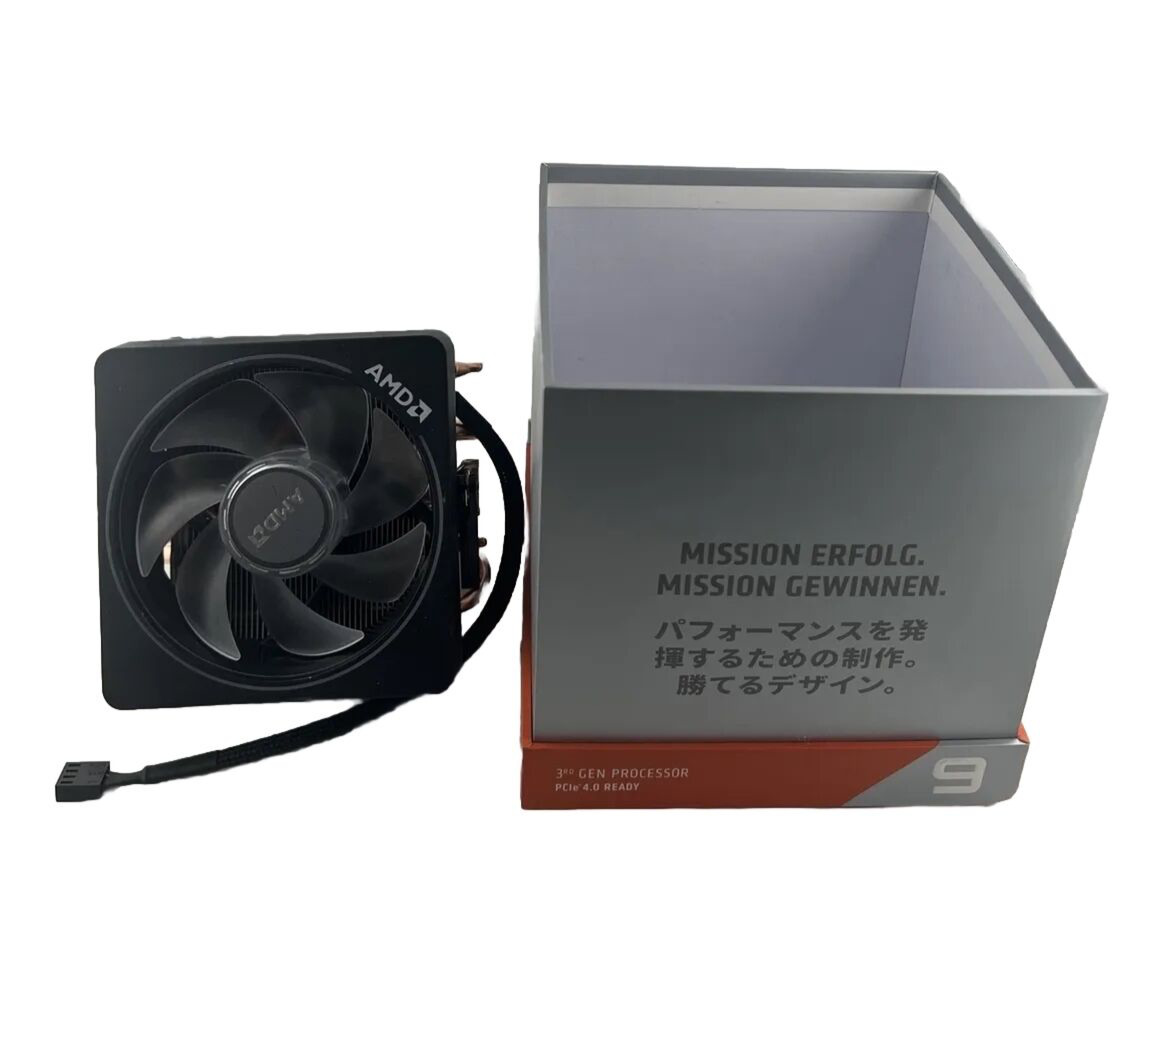 AMD Ryzen 9 AM4 3rd Gen AMD CPU FAN and box ONLY. CPU NOT INCLUDED